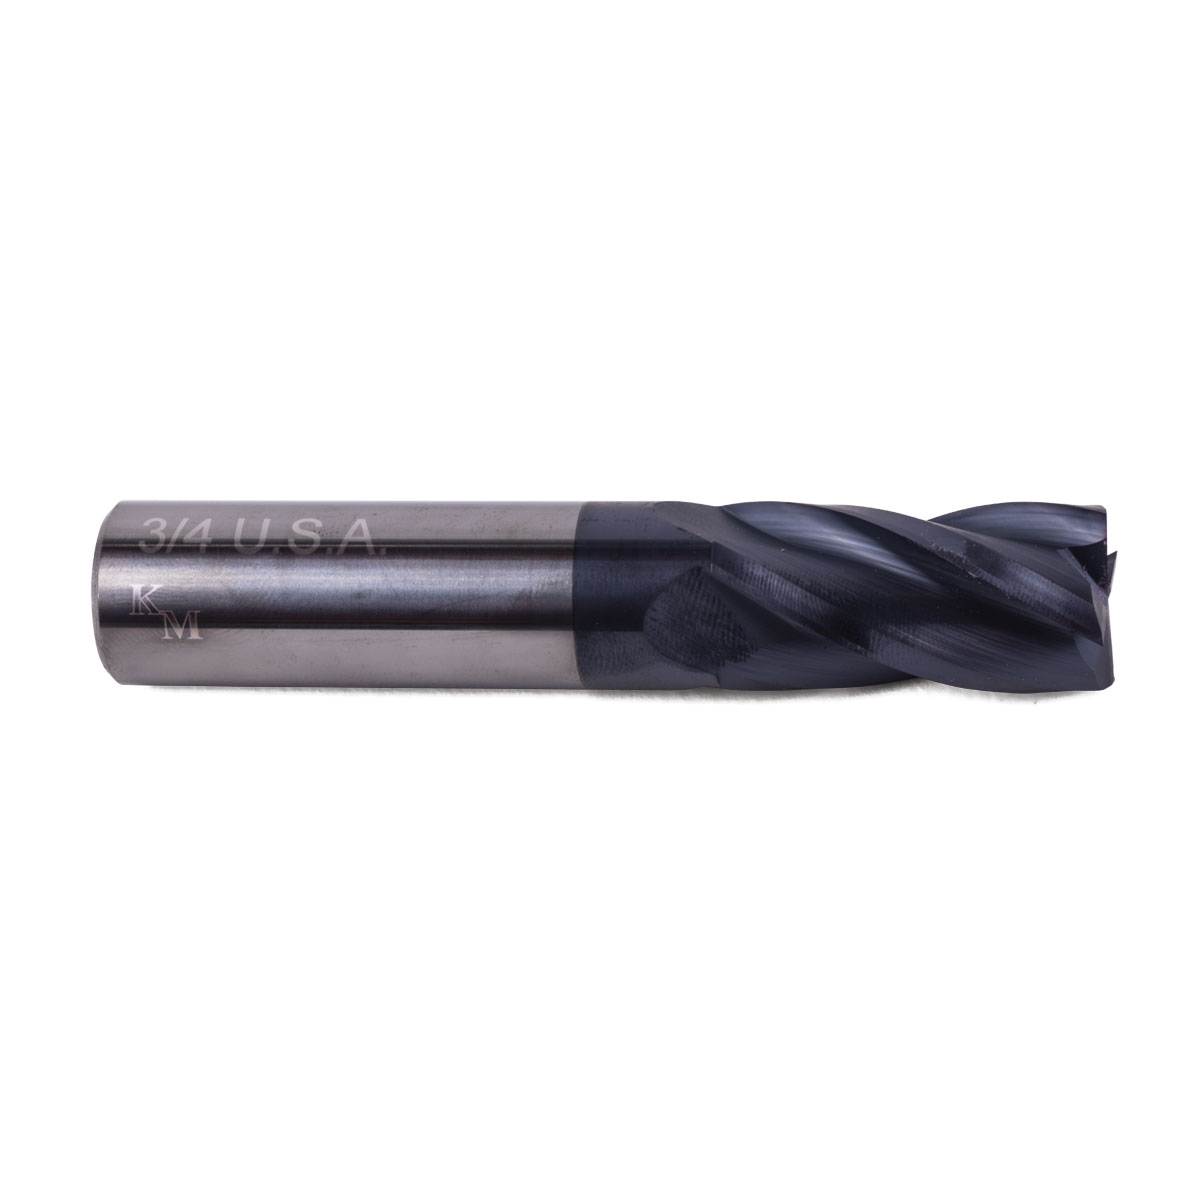 5/16 AlTiN Coated End Mill